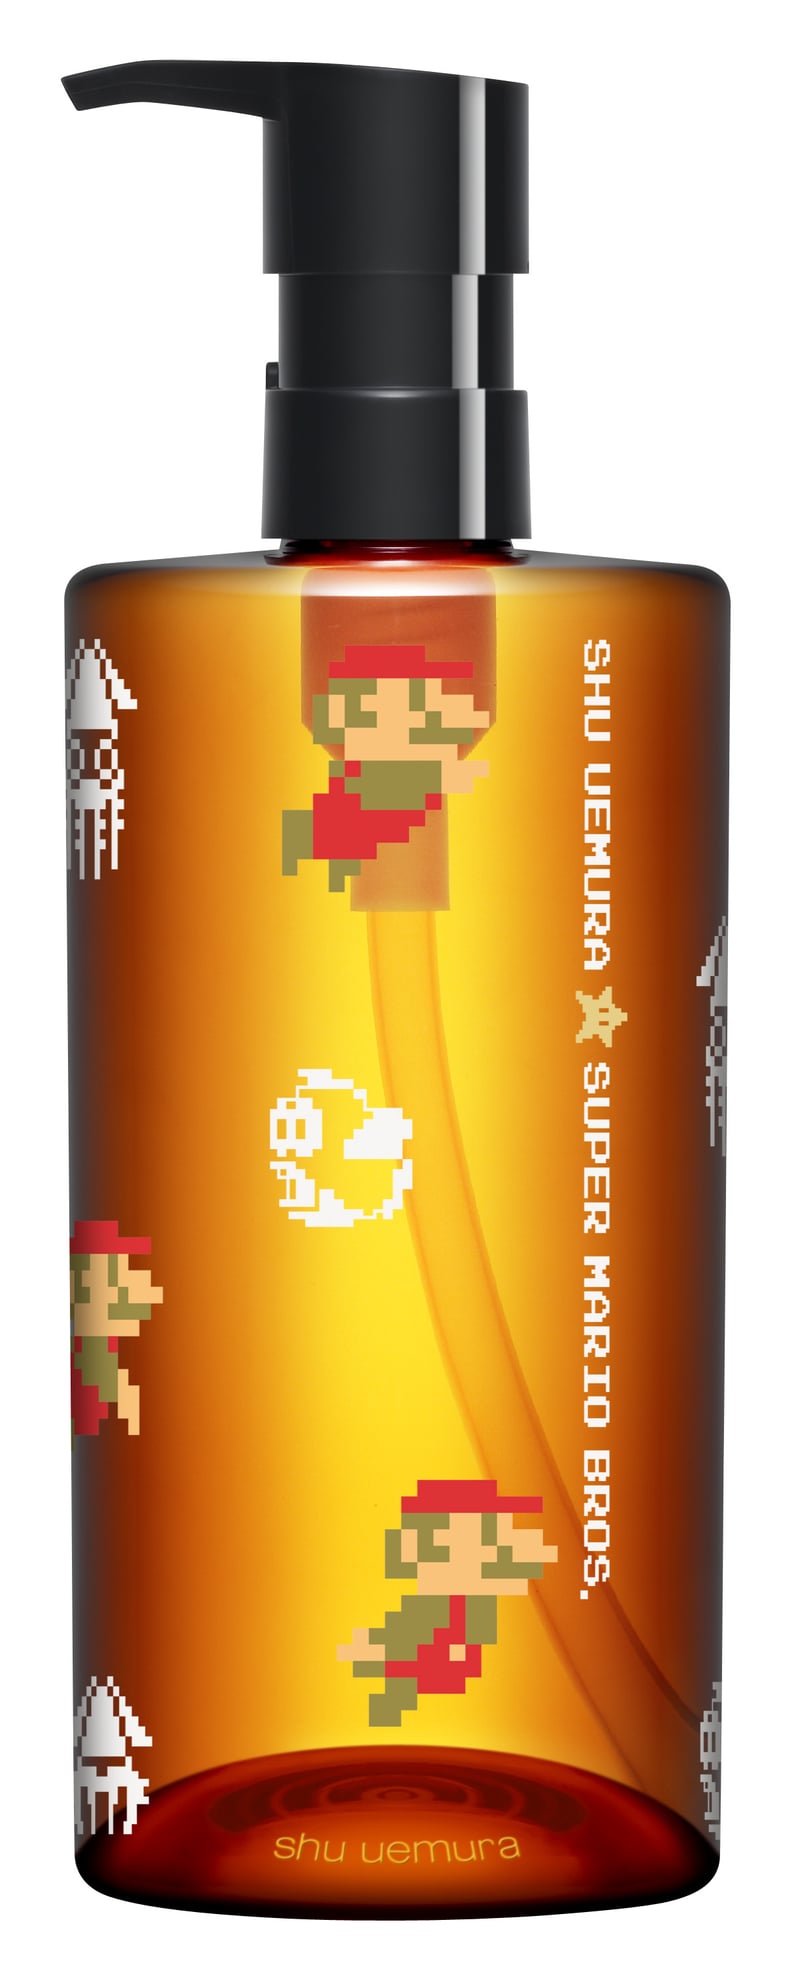 Shu Uemura x Super Mario Bros Ultime8 Sublime Beauty Cleansing Oil, $91